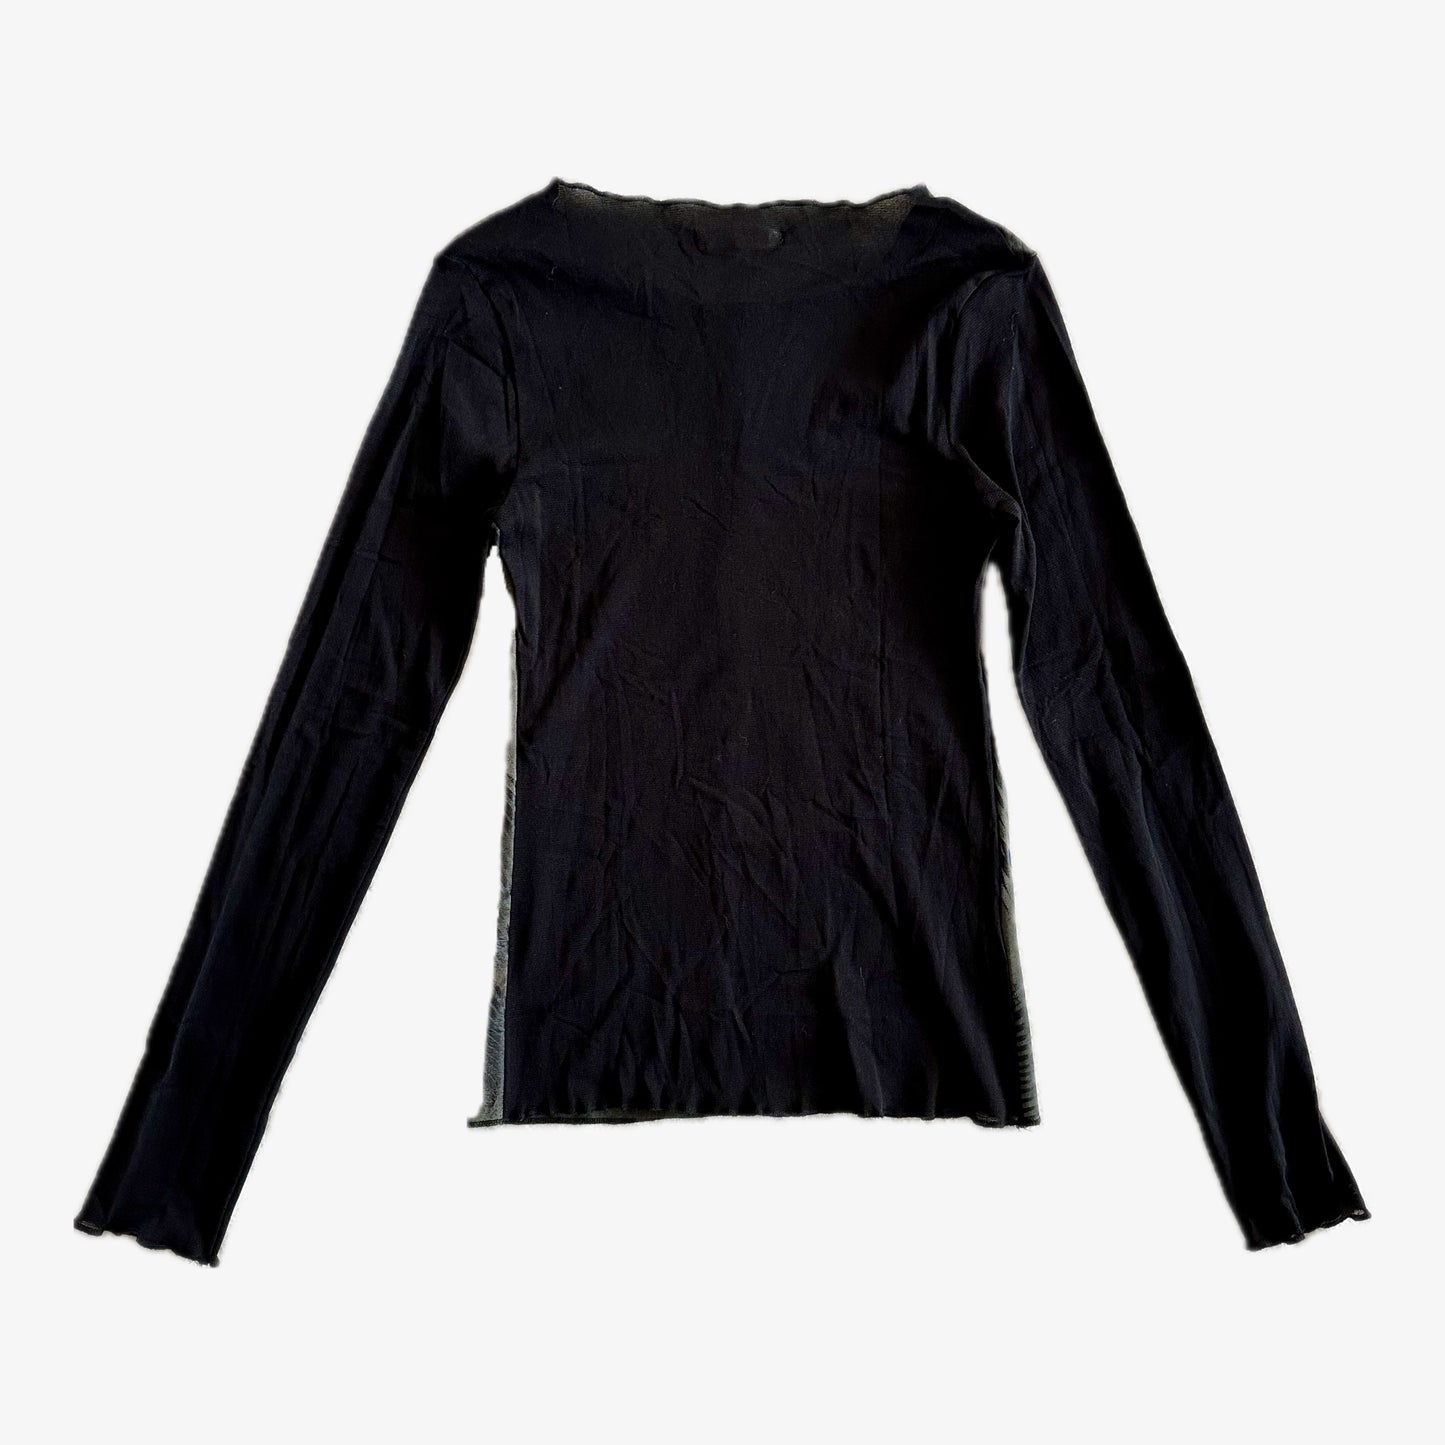 Graphic Black Top With Mesh Long Sleeves (XS)